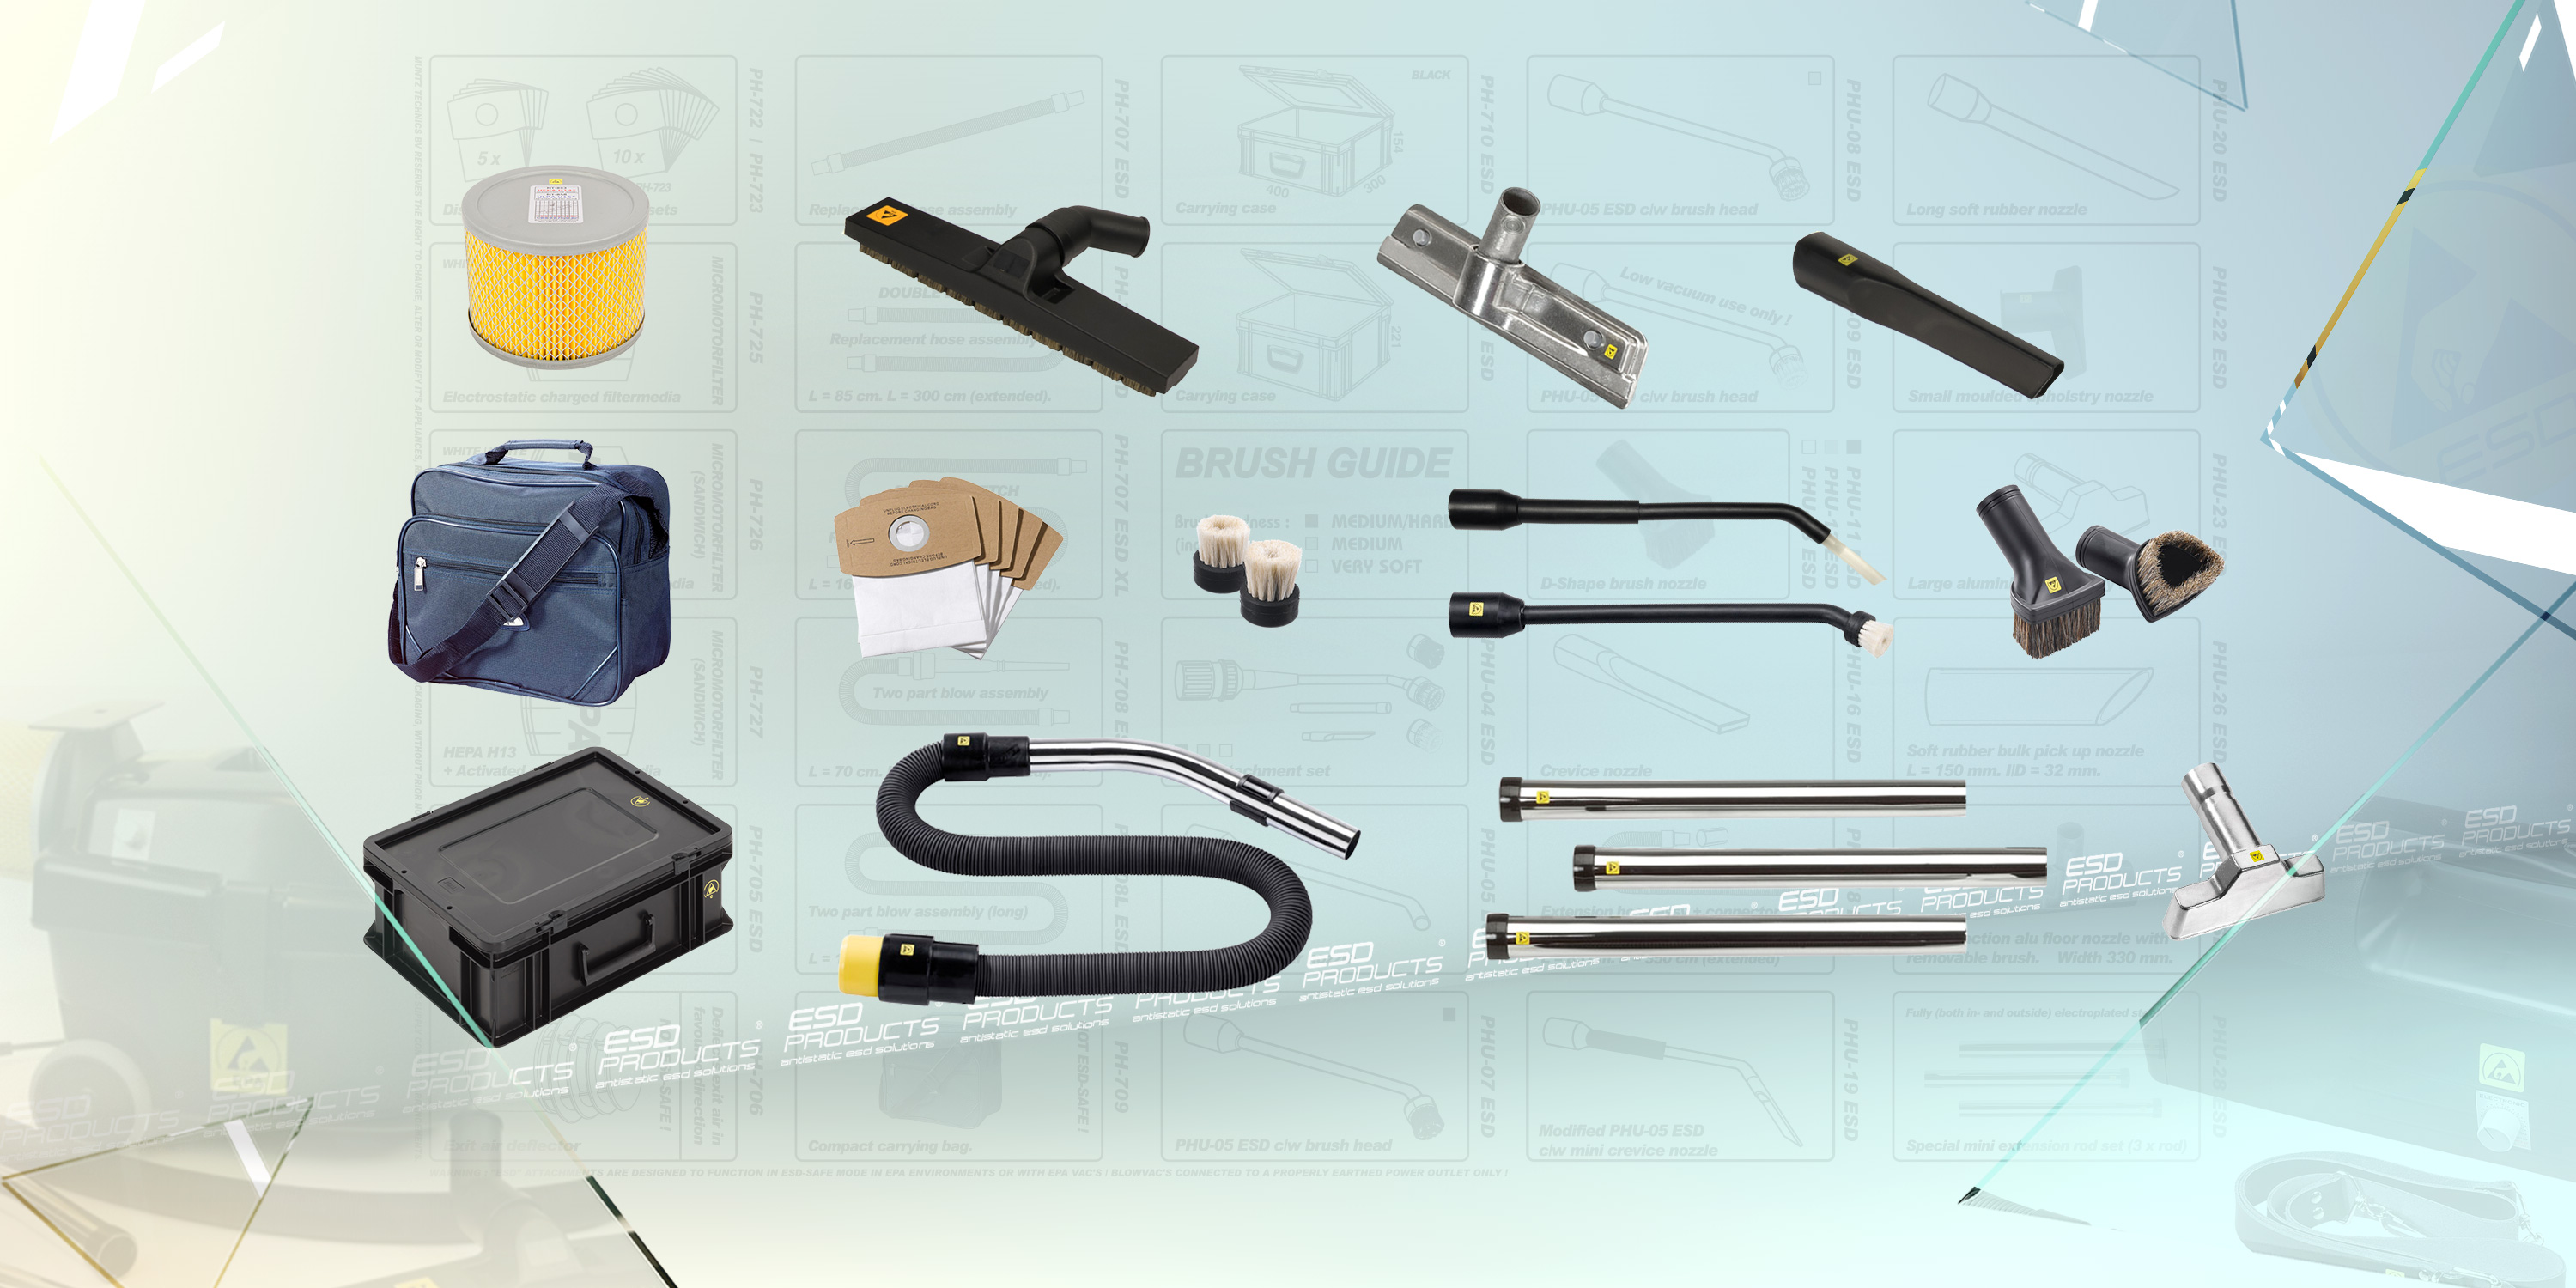 ESD Vacuum Cleaner Accessories_Industrial ESD BlowVac EPA compliant_ESD Safe Cleaning